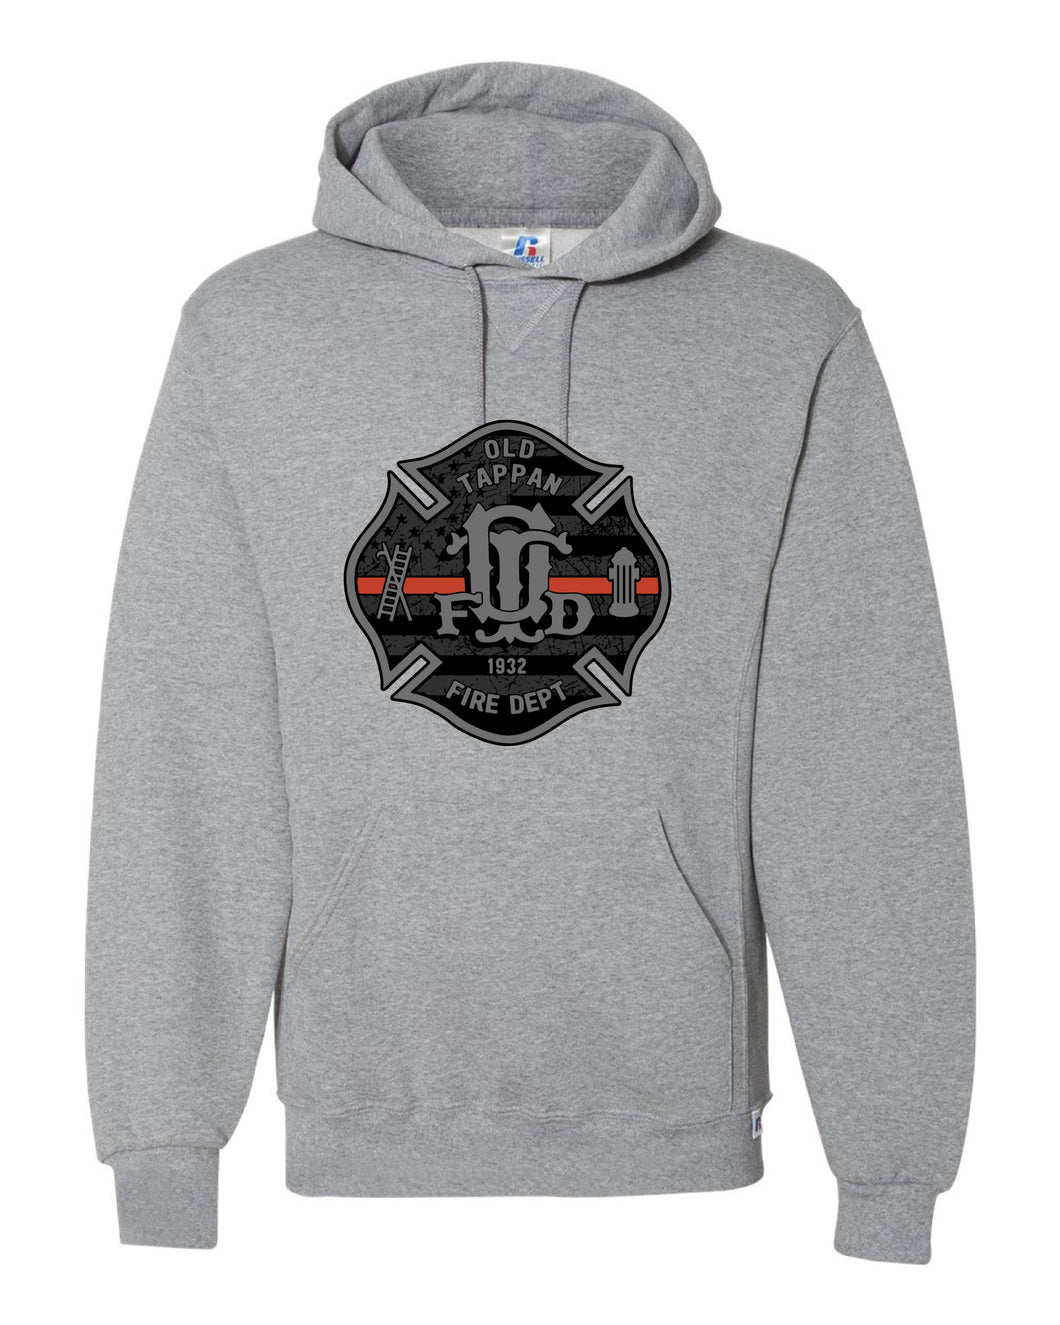 Old Tappan Fire Dept Russell Athletic Cotton Hoodie - 5KounT2018